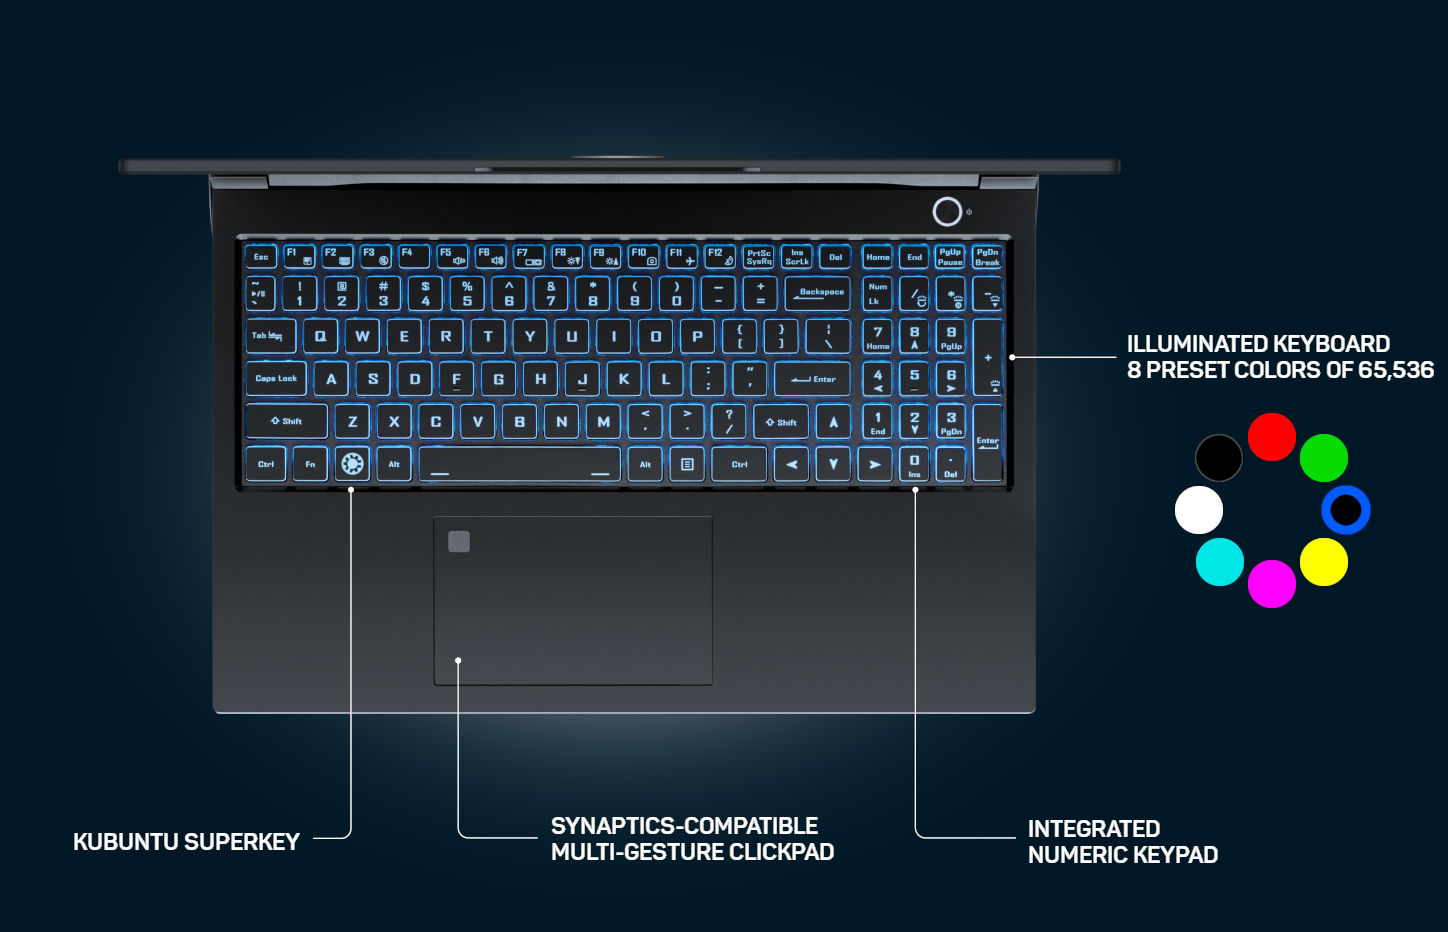 Keyboard Colors and Touchpad